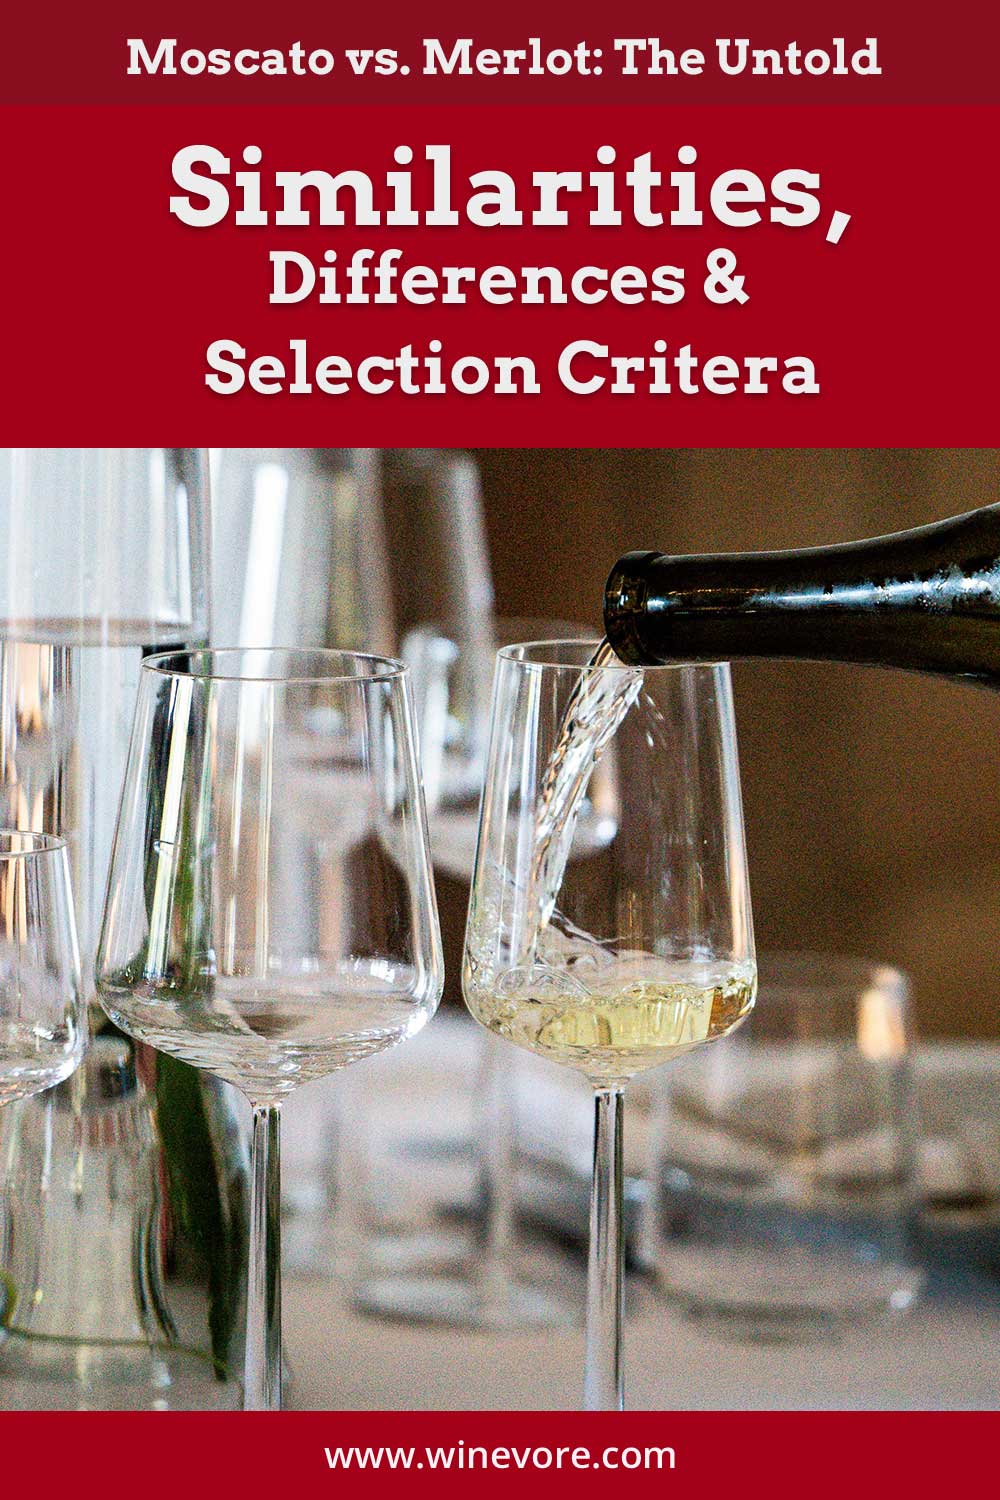 Poring white wine into a glass on a table - Moscato vs. Merlot: Similarities, Differences & Selection Criteria